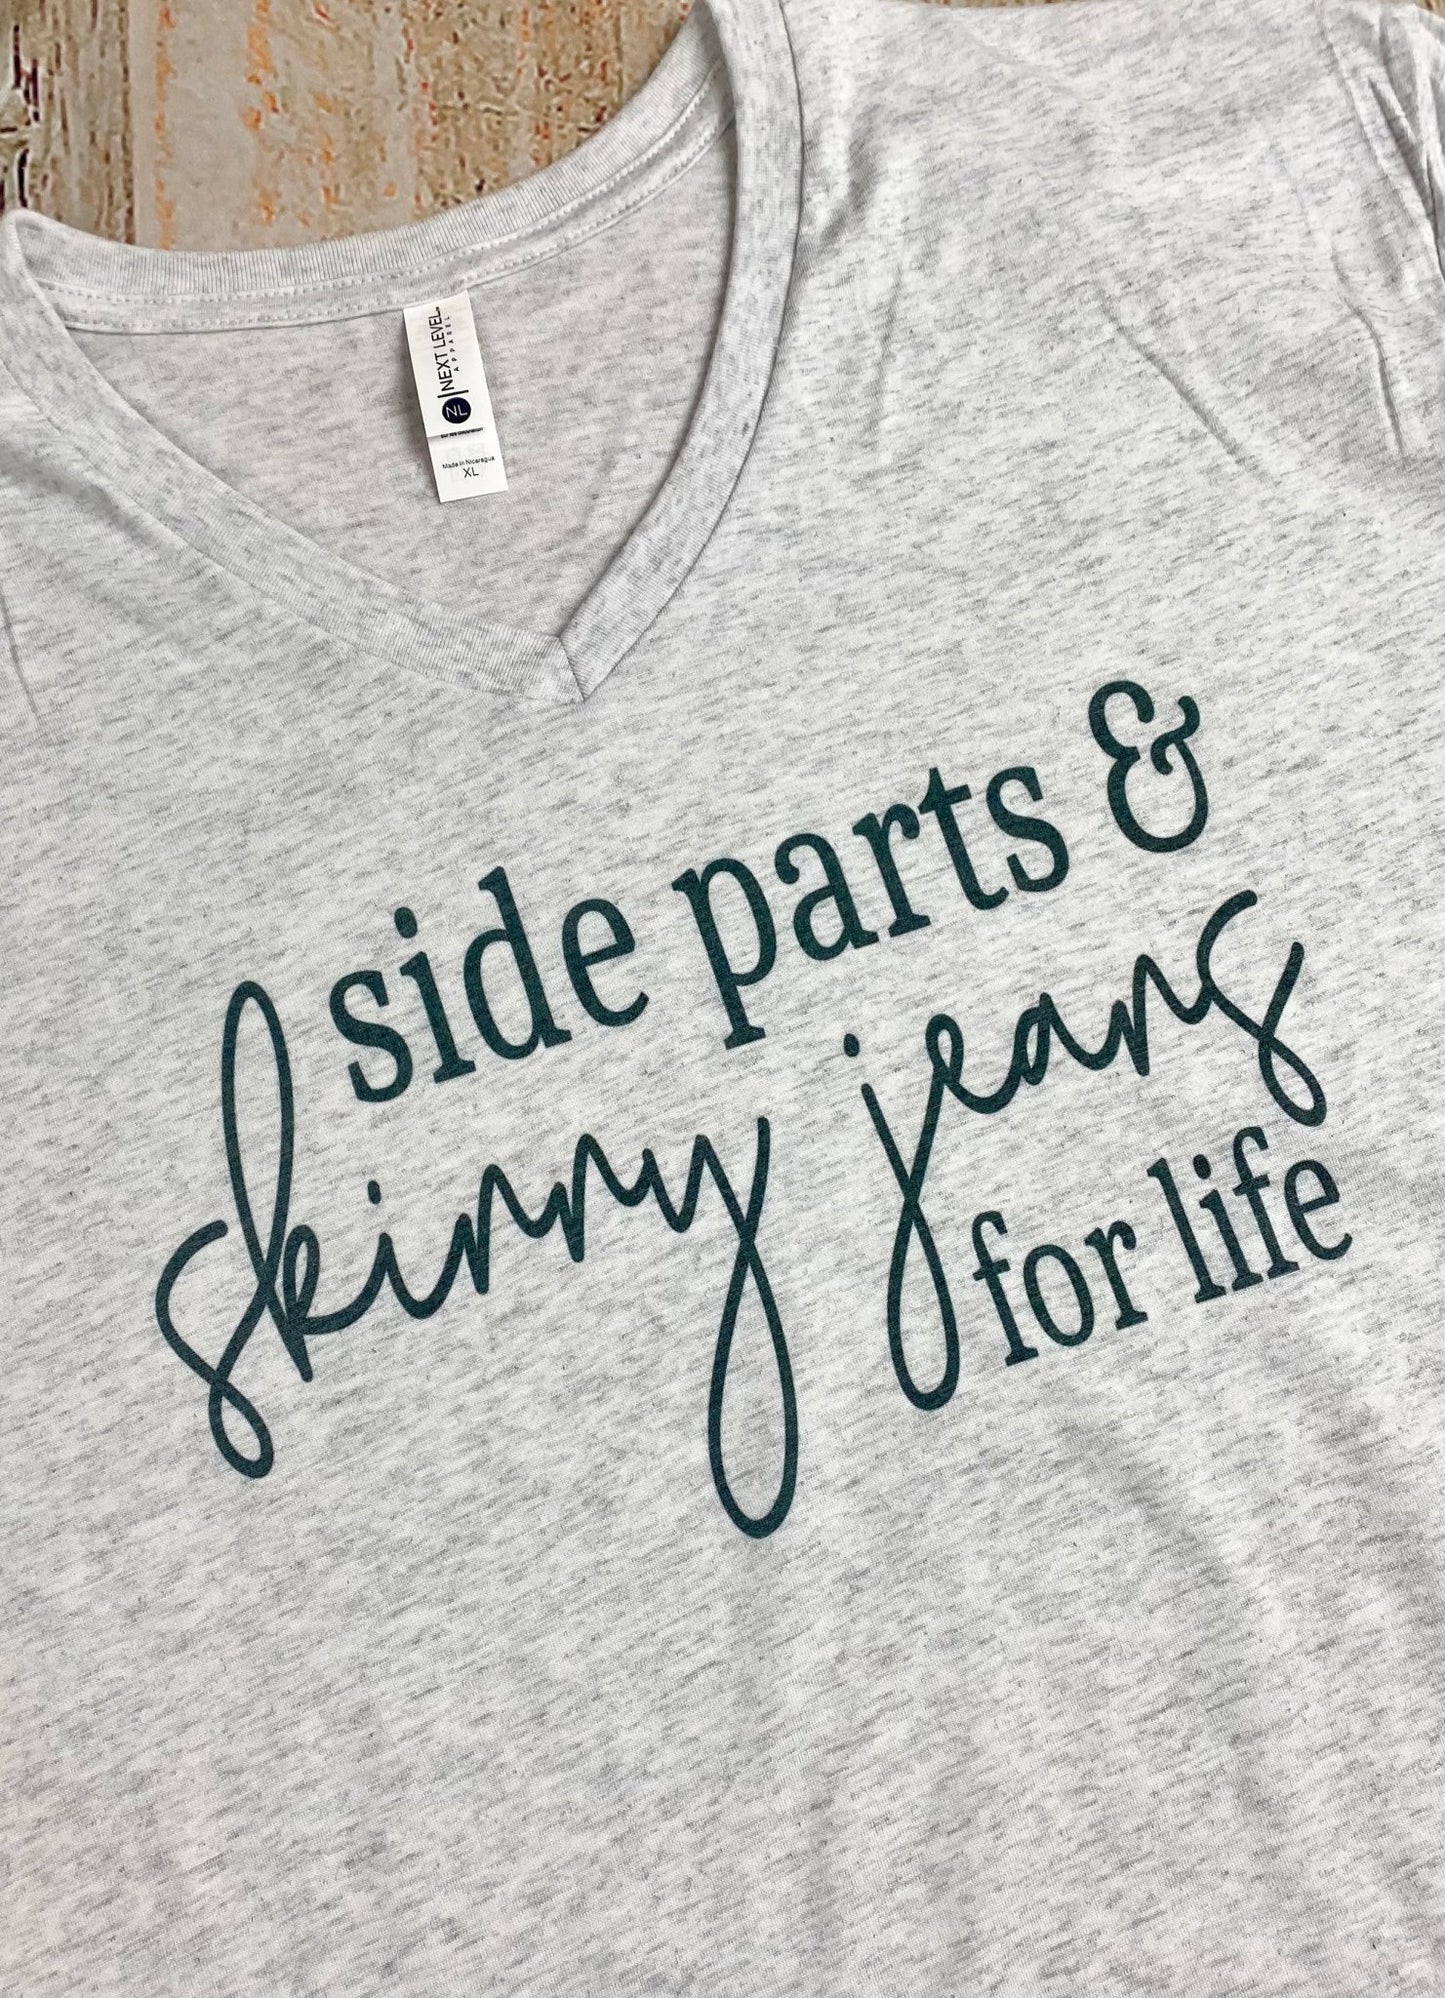 Side Parts & Skinny Jeans V Neck Graphic Tee - Jimberly's Boutique